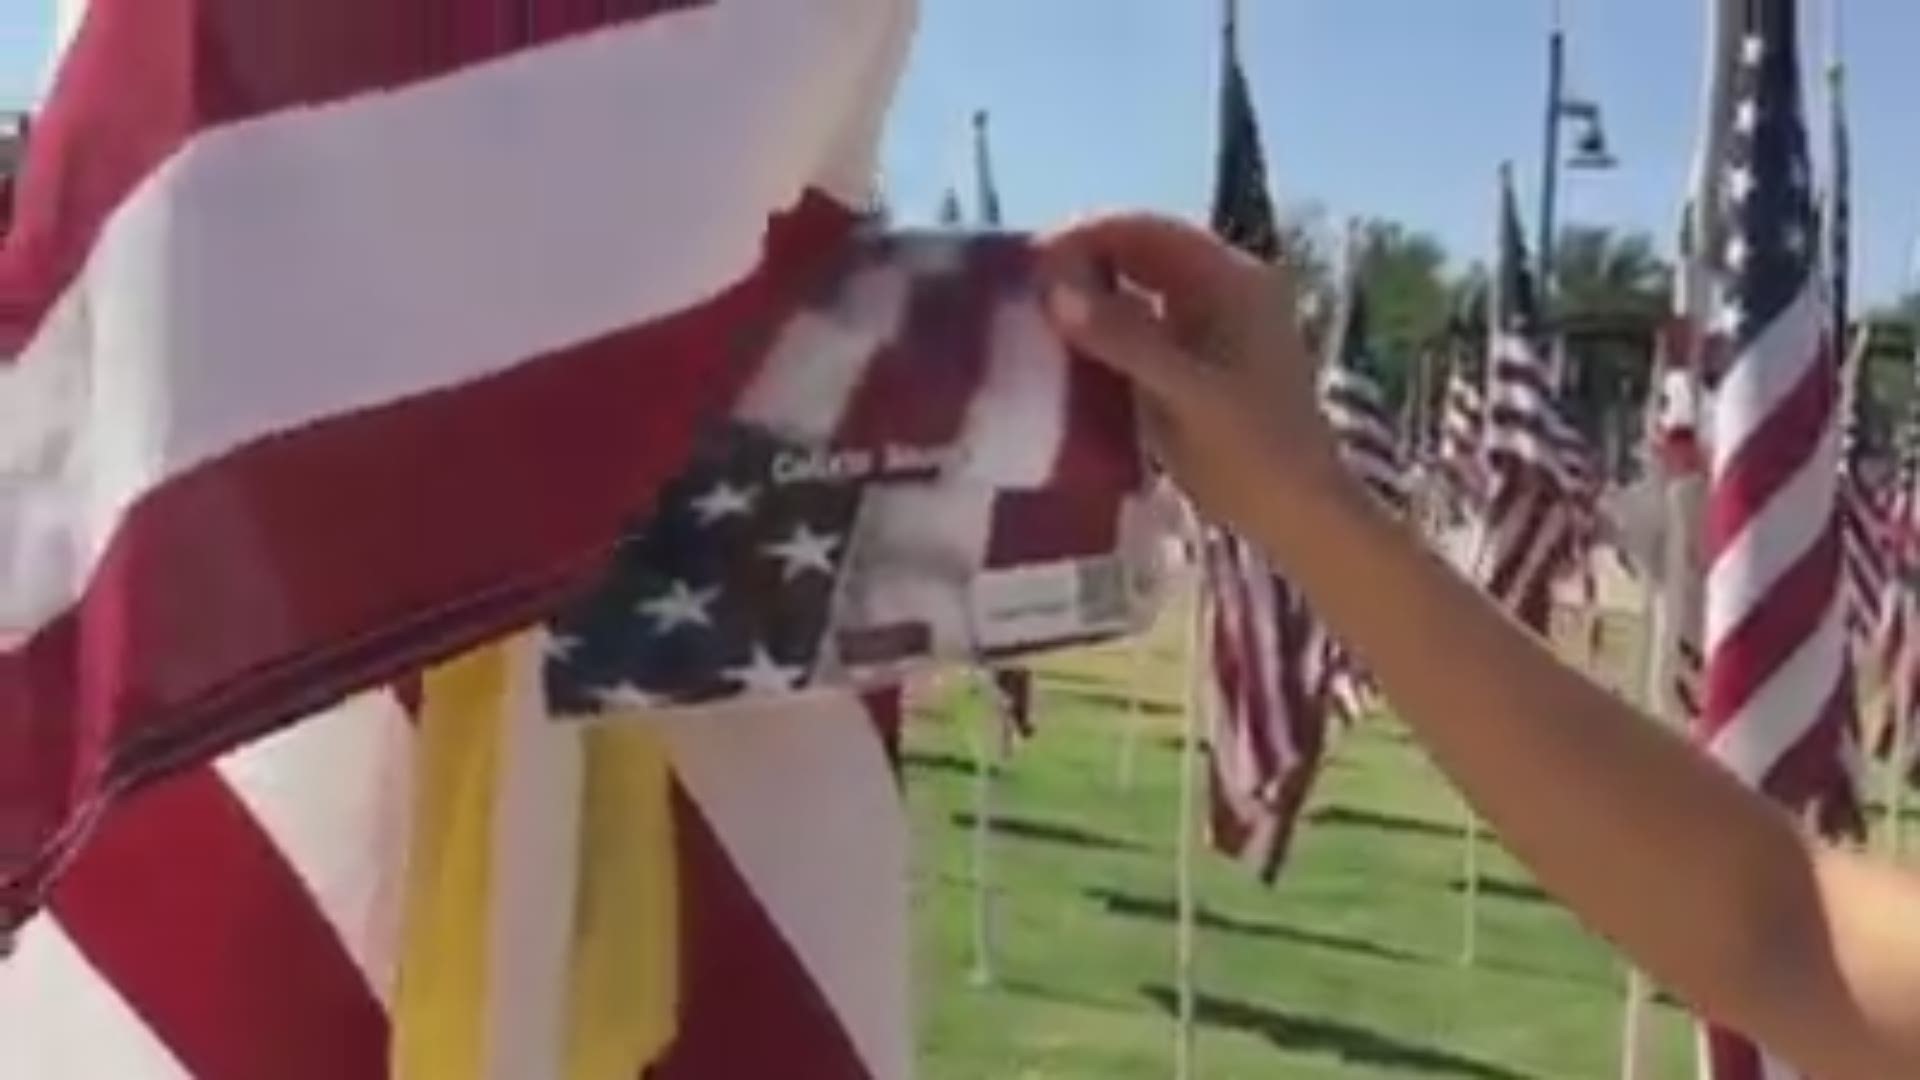 The City of Tempe, and the Exchange Club of Tempe, are honoring those who perished with a unique tribute called the Healing Fields at Tempe Beach Park.